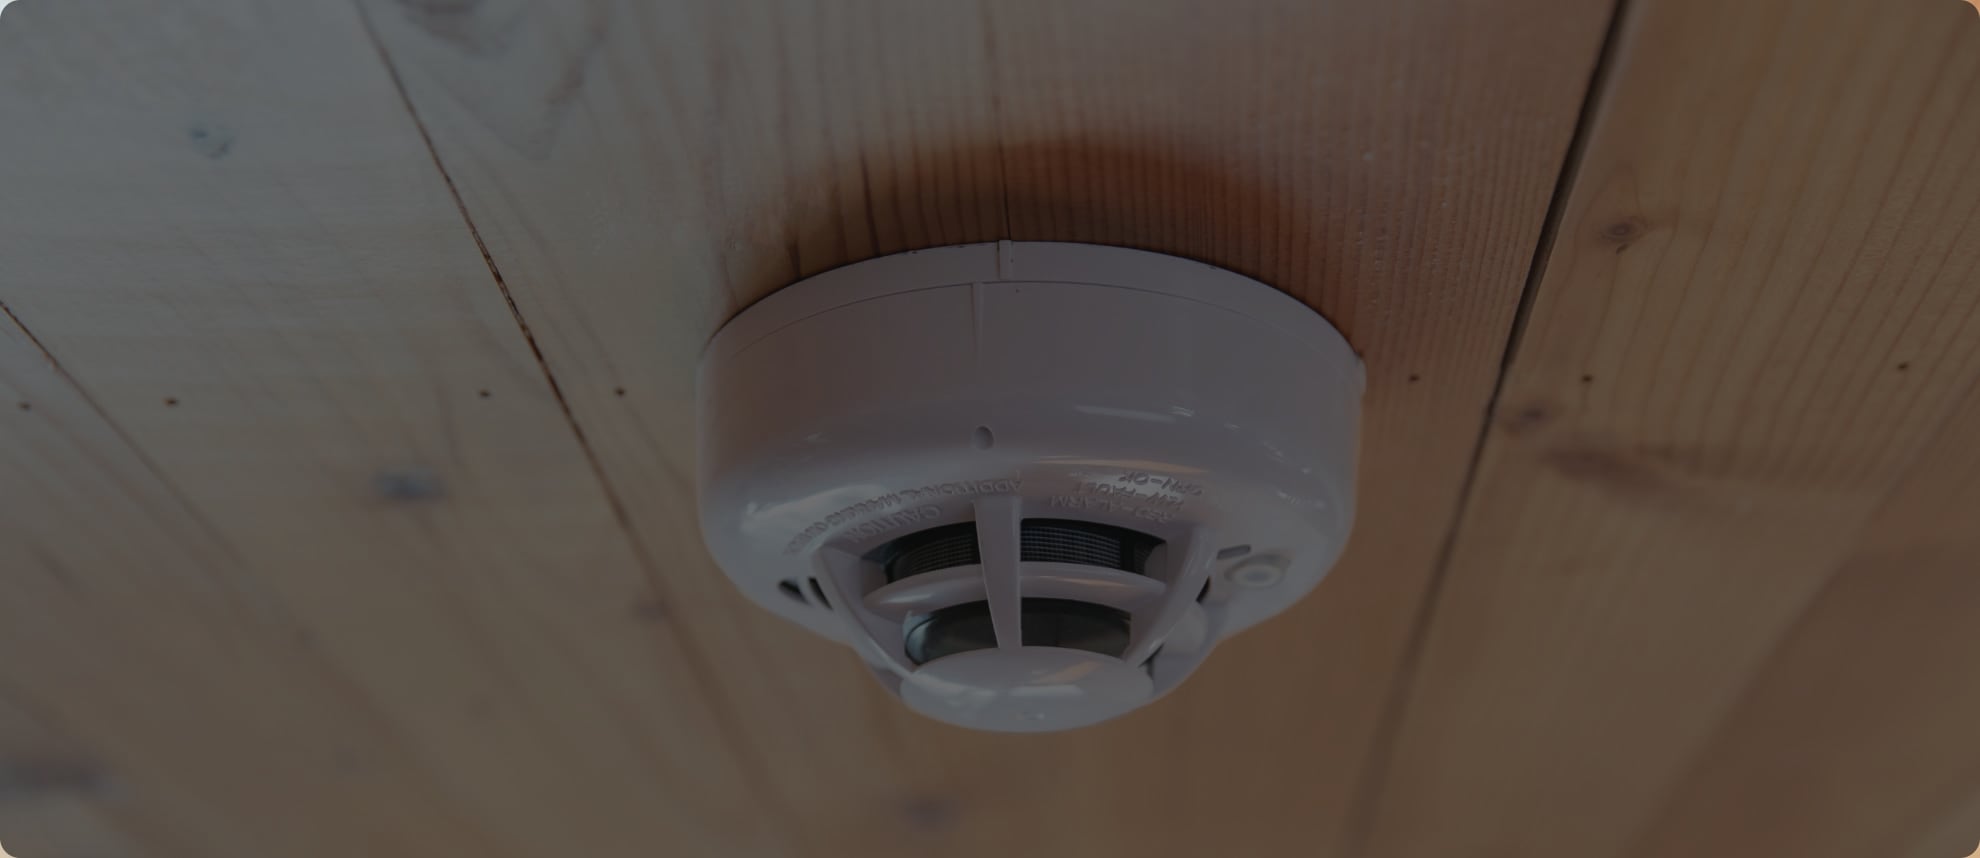 Vivint Monitored Smoke Alarm in Fort Smith